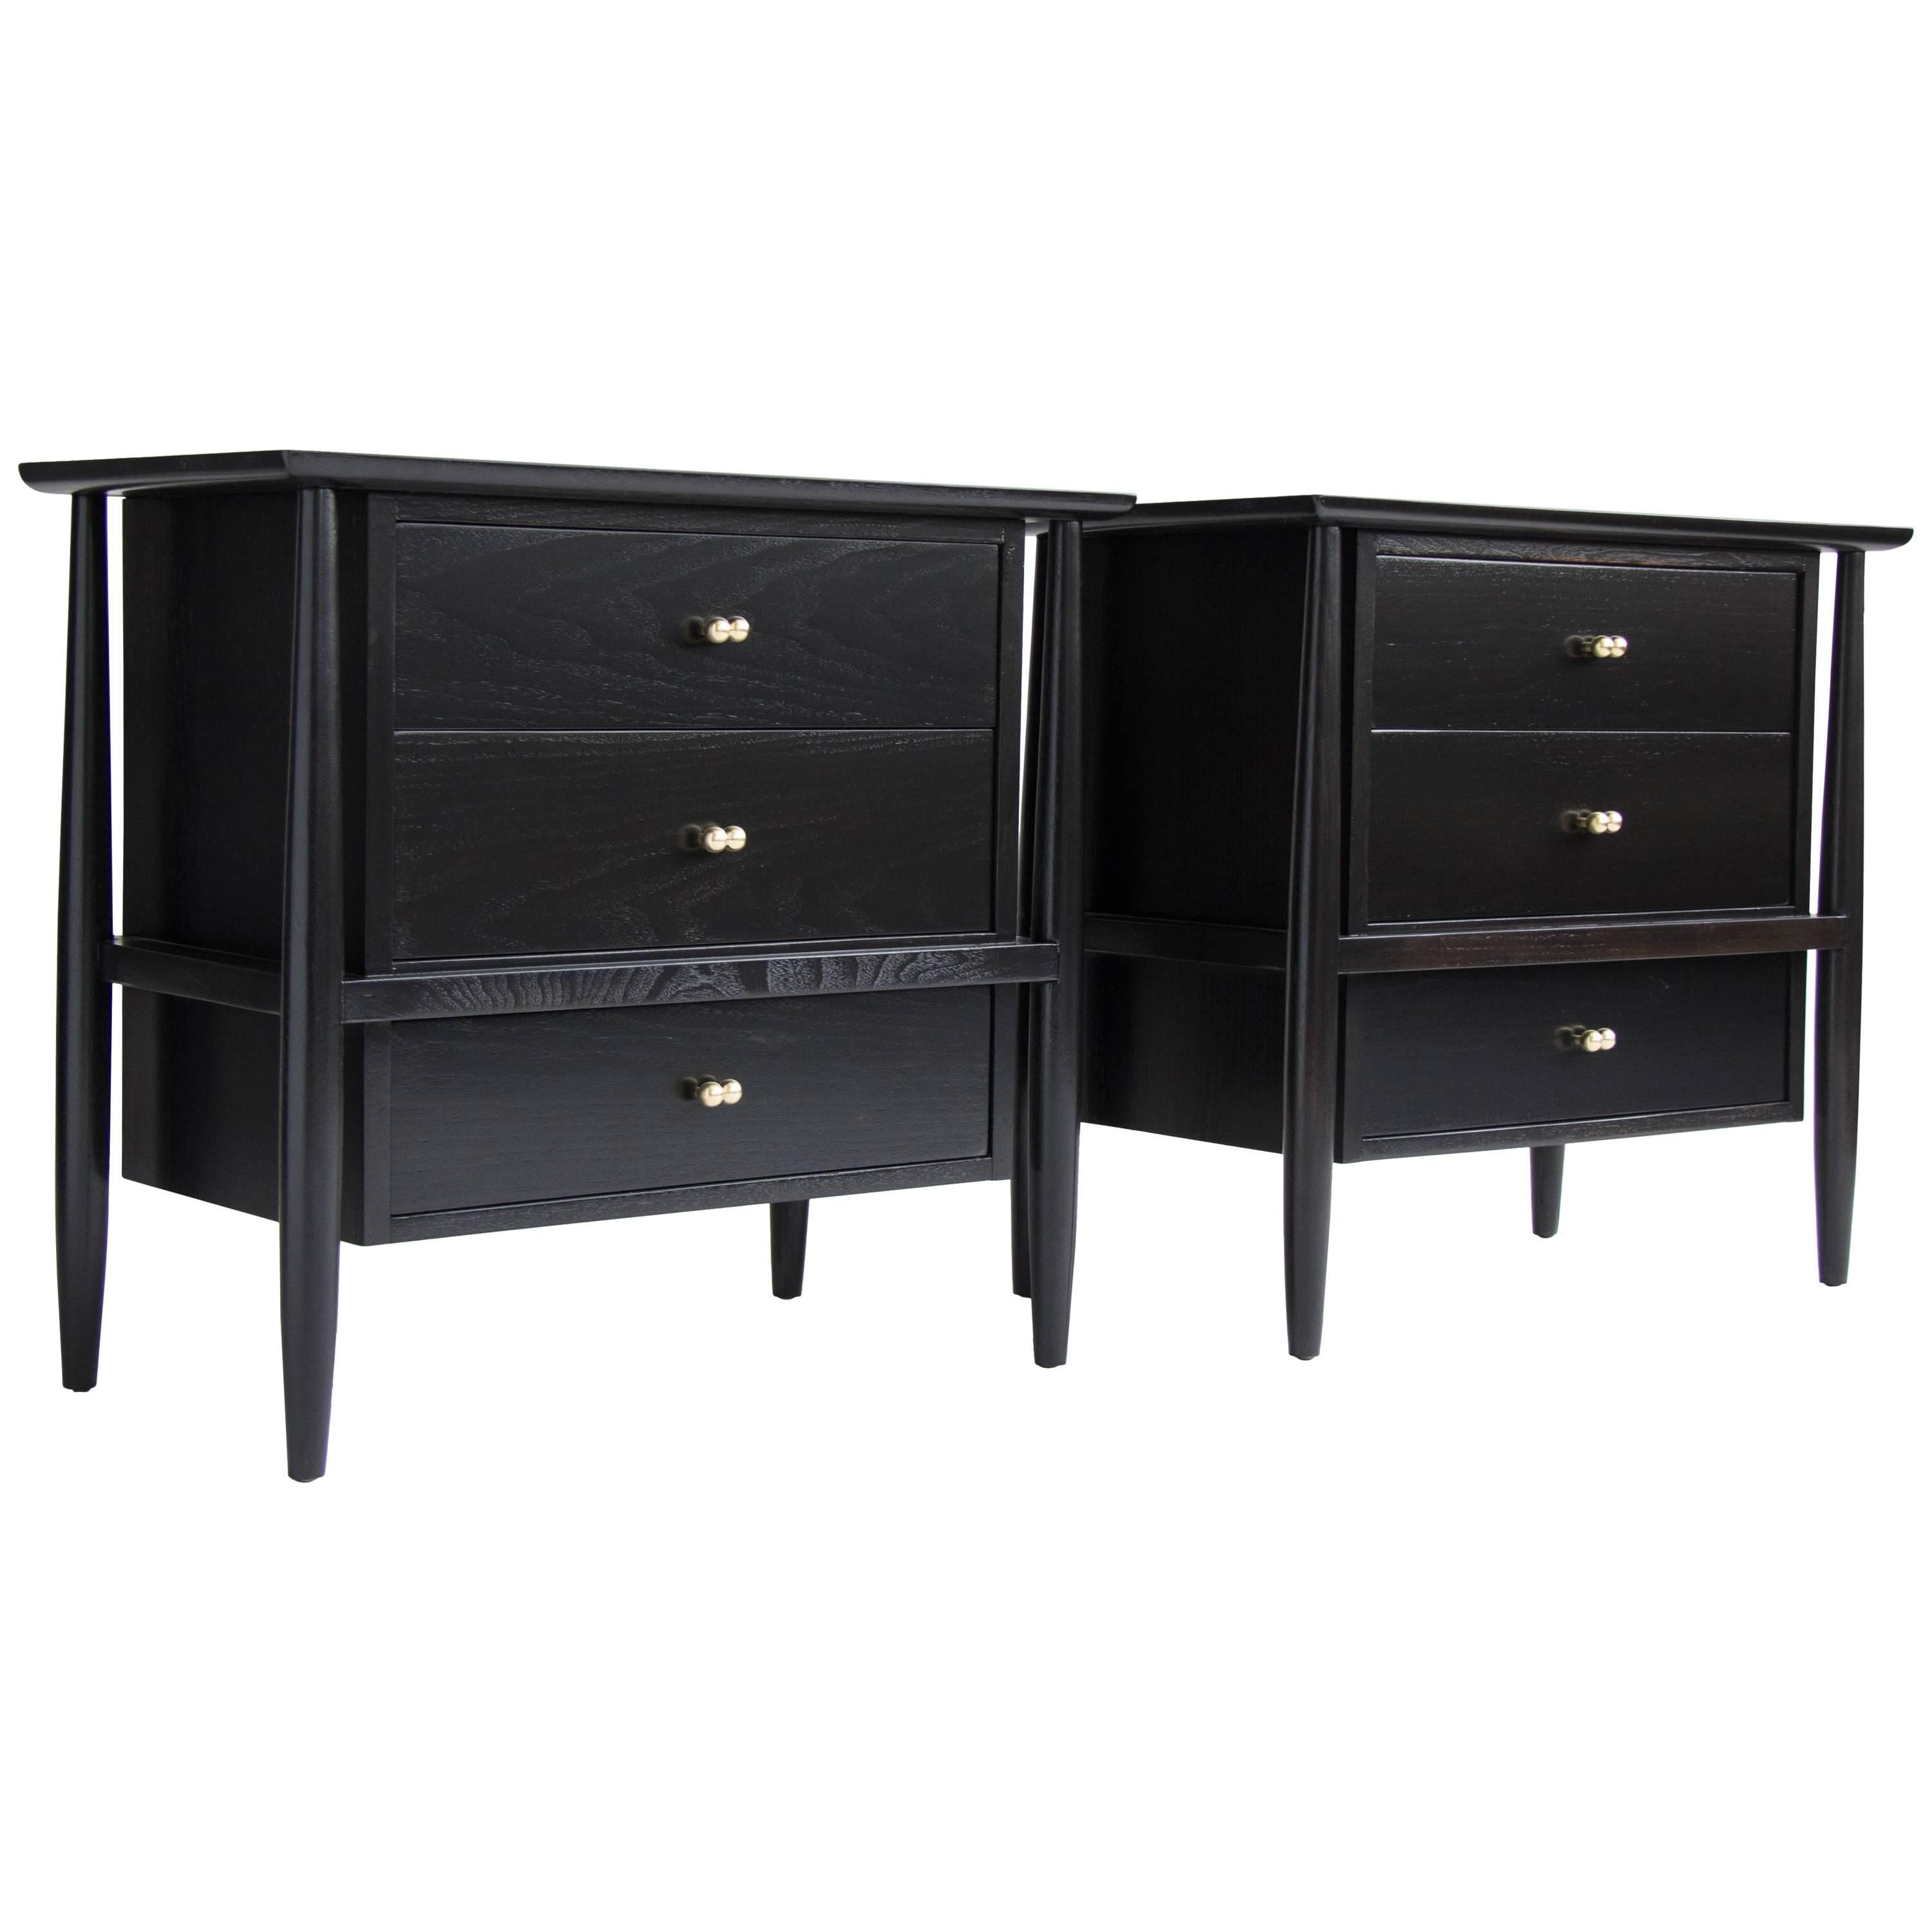 Pair of Ebonized Nightstands with Brass Details by John Stuart for Mt Airy